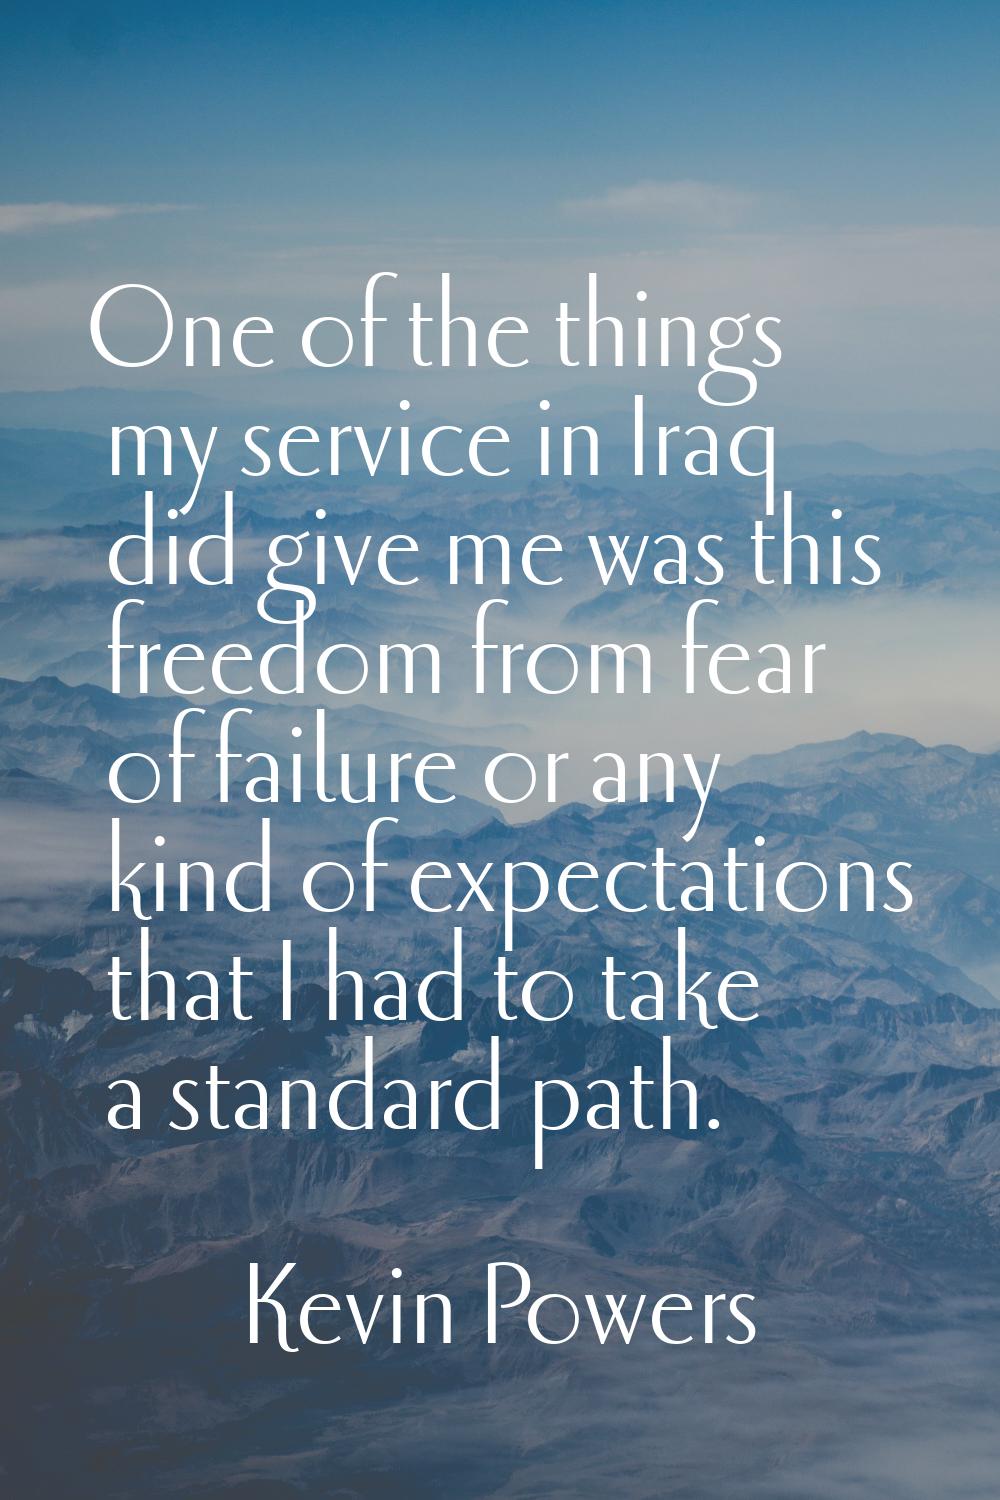 One of the things my service in Iraq did give me was this freedom from fear of failure or any kind 